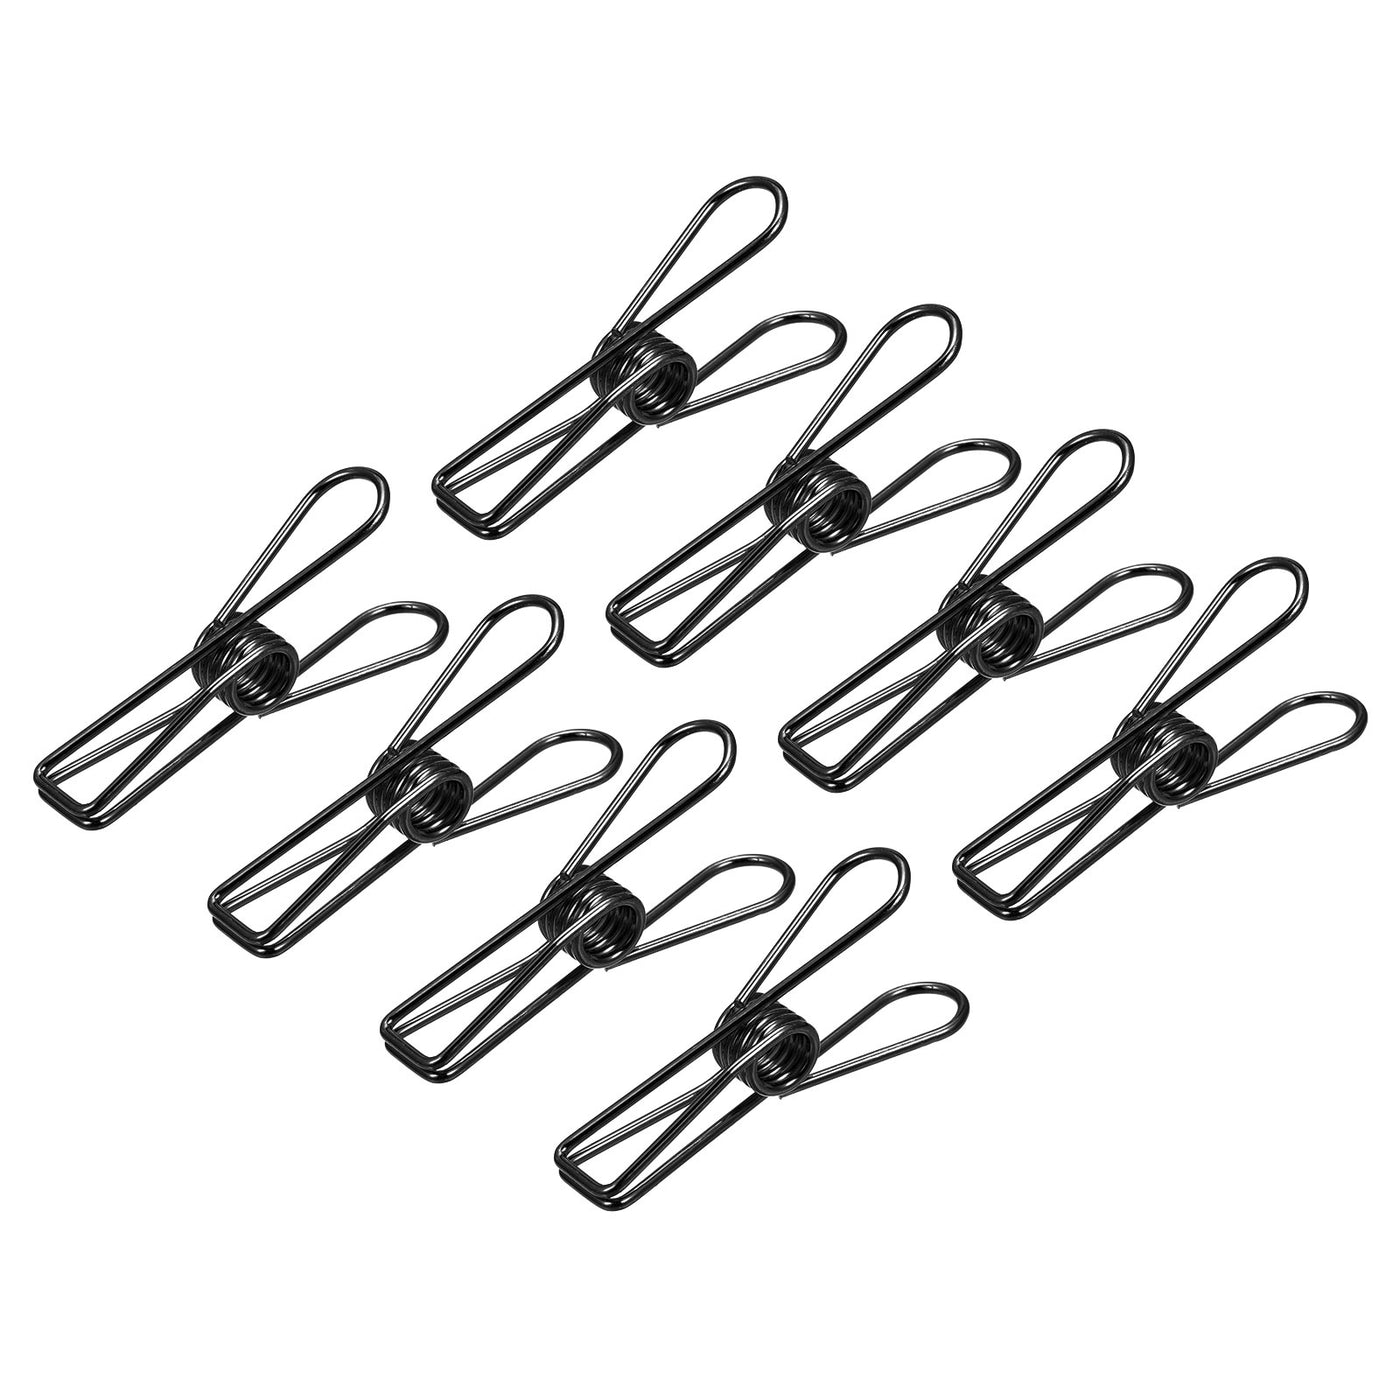 uxcell Uxcell Tablecloth Clips, 55mm Carbon Steel Clamps for Fix Table Cloth, Black 8 Pcs